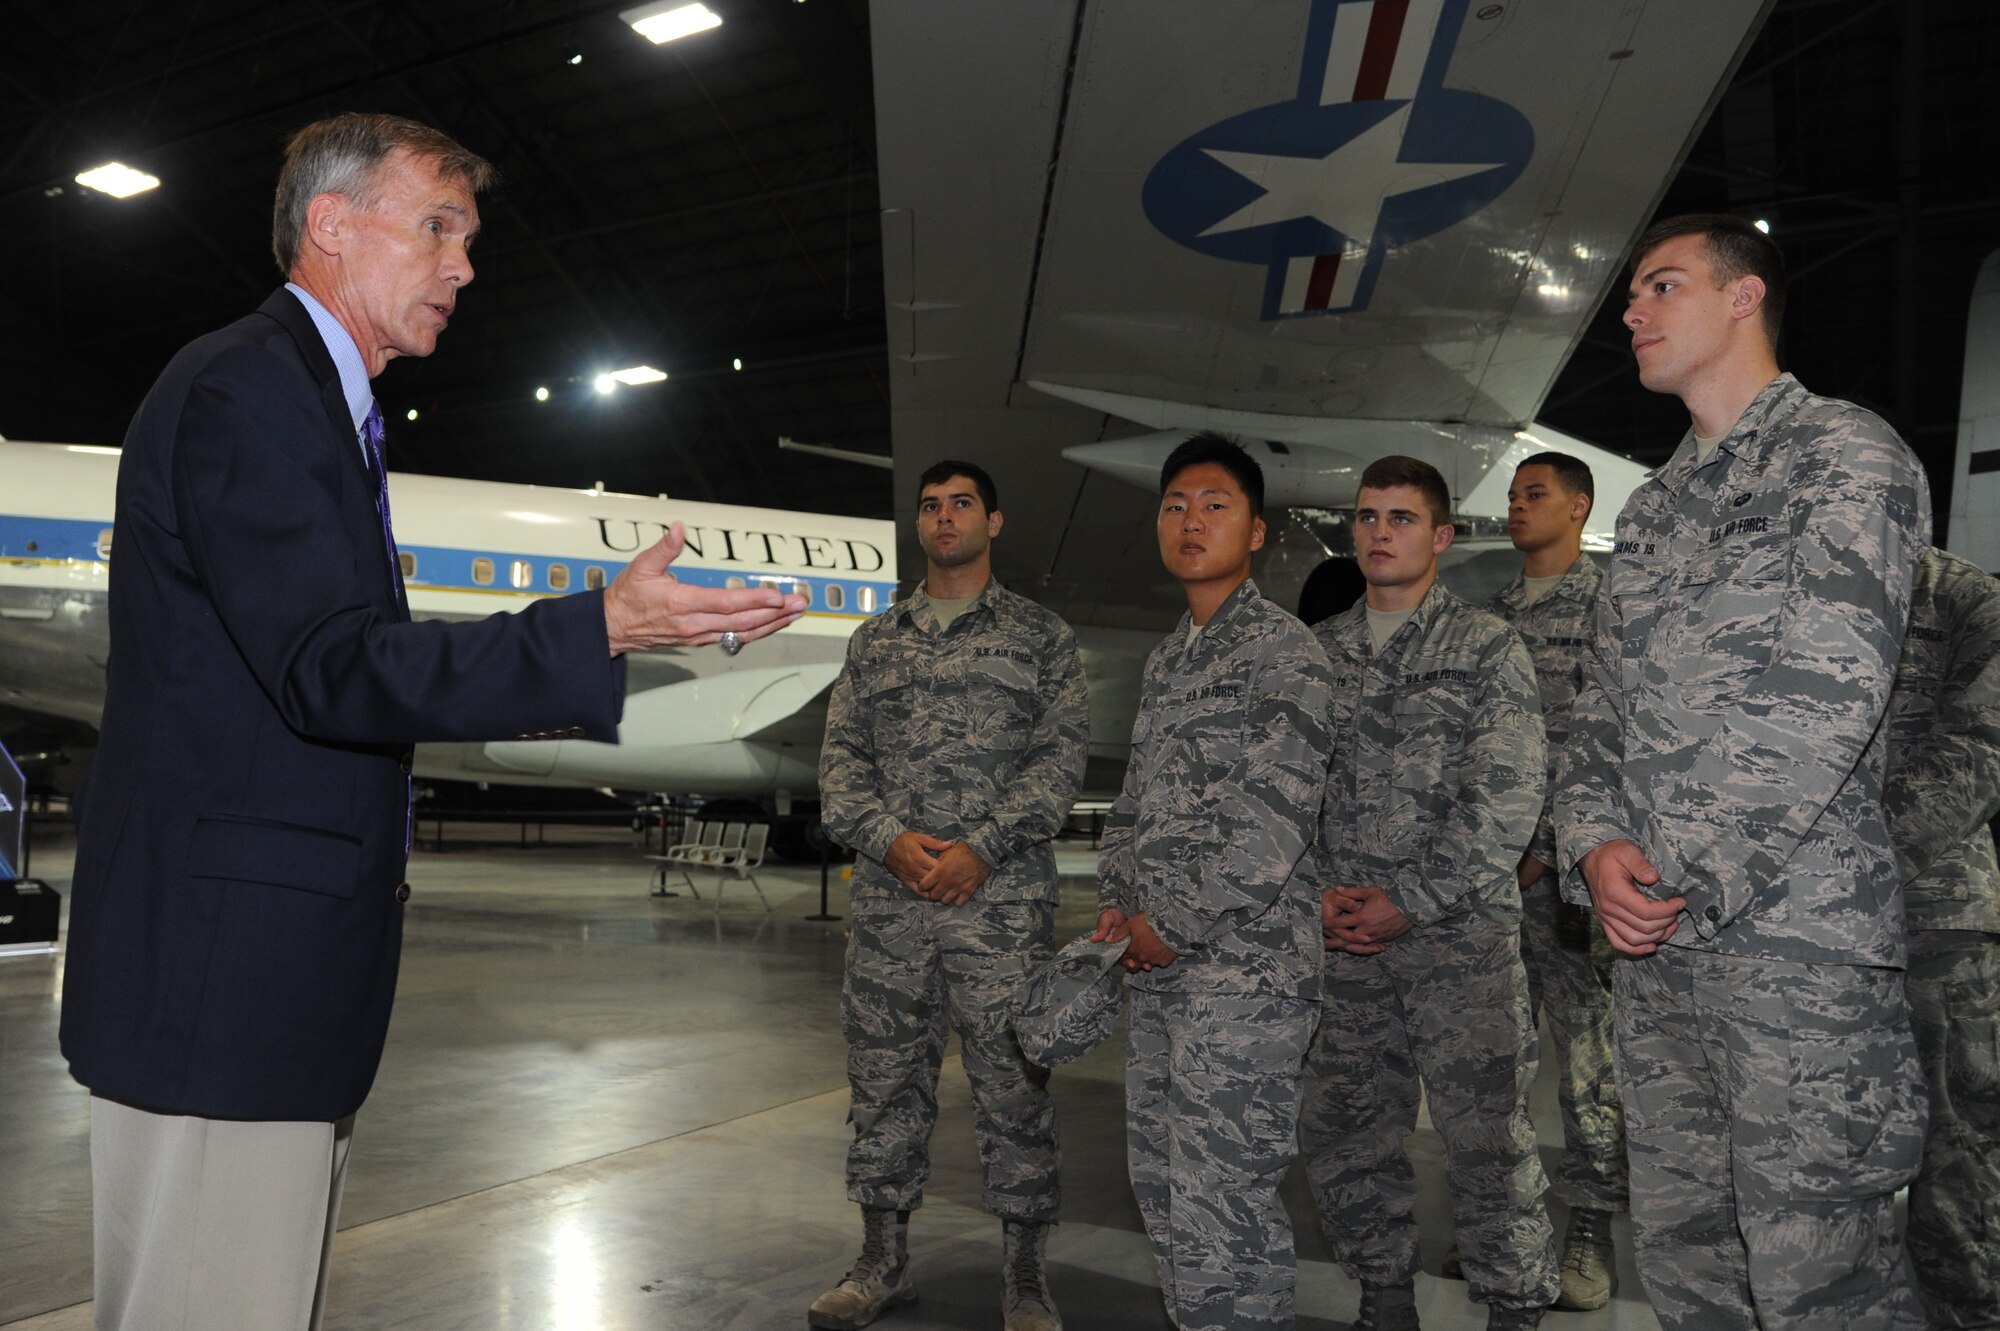 United States Air Force Academy cadets view the recently opened fourth hangar at the National Museum of the United States Air Force guided by museum director Lt. Gen. John L. Hudson (retired) June 14, 2017.  Cadets visited Wright-Patterson Air Force Base as part of the Ops AF program, giving them real world experience with air force culture and careers to aid their professional development. (U.S. Air Force photo / Tech. Sgt. Scott Johnson)